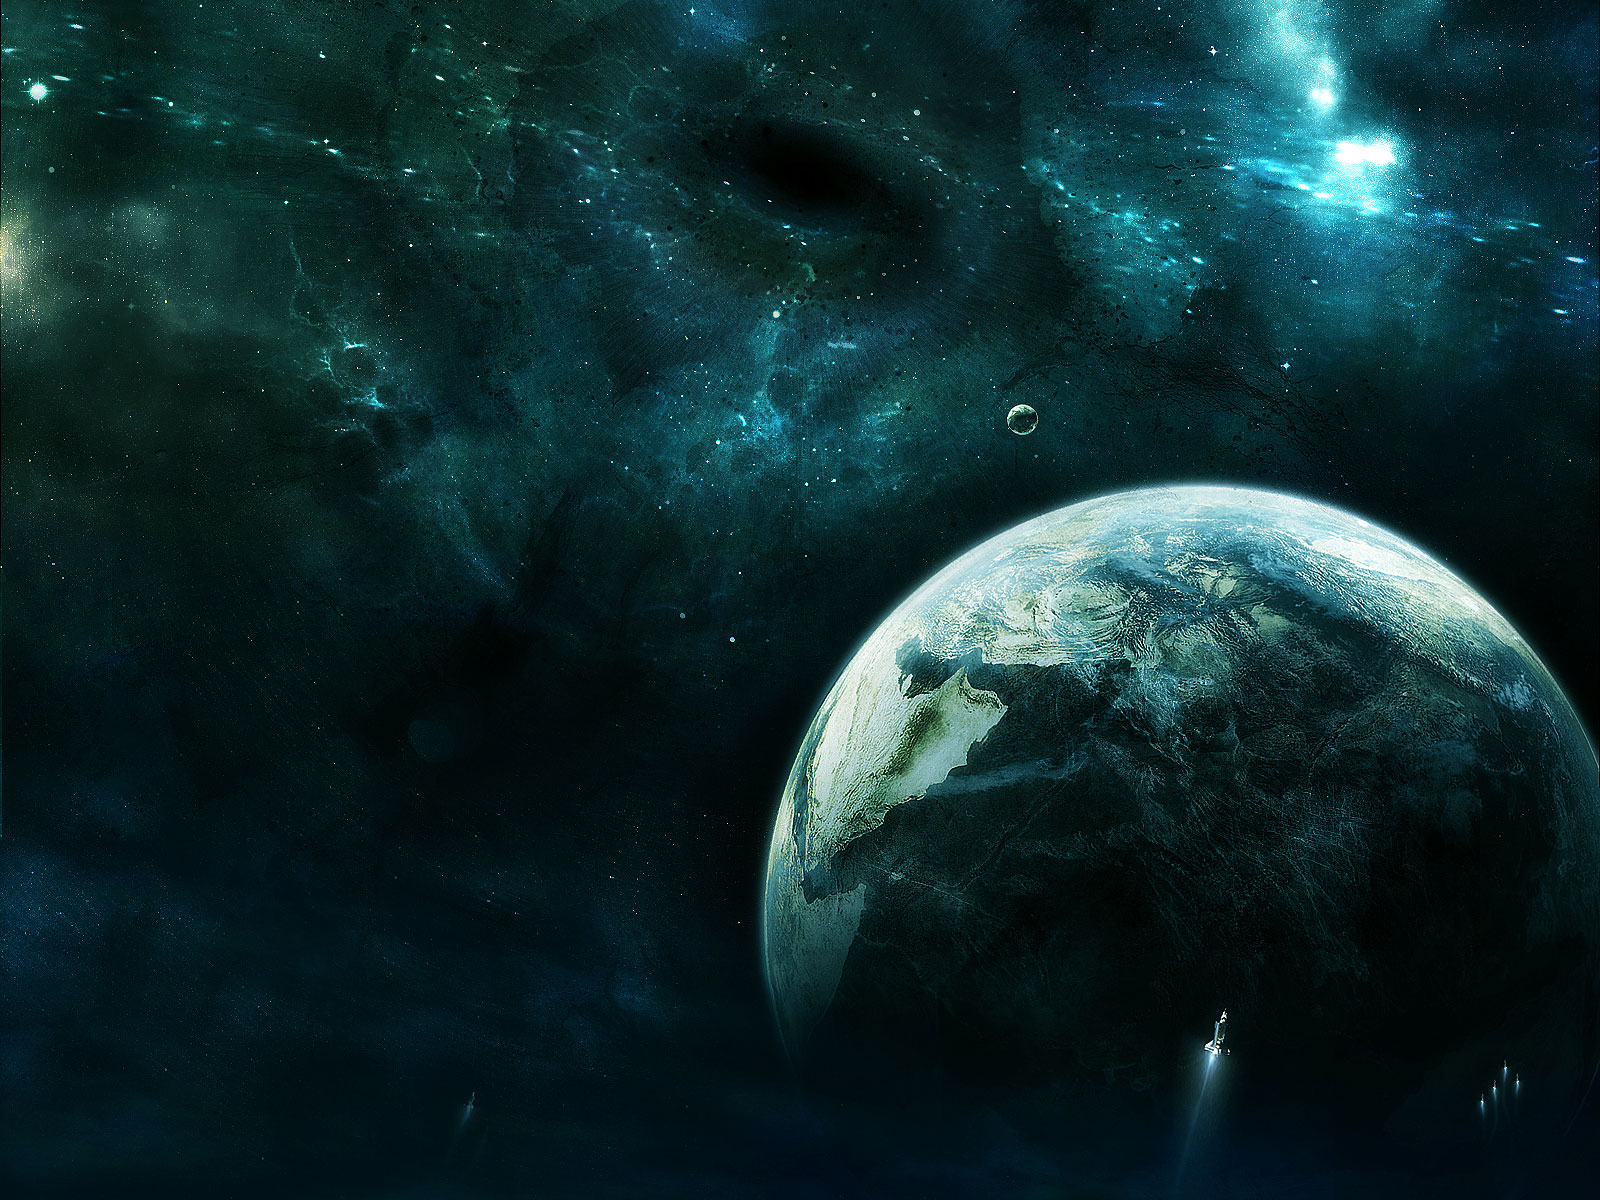 High definition desktop wallpaper featuring a view of Earth